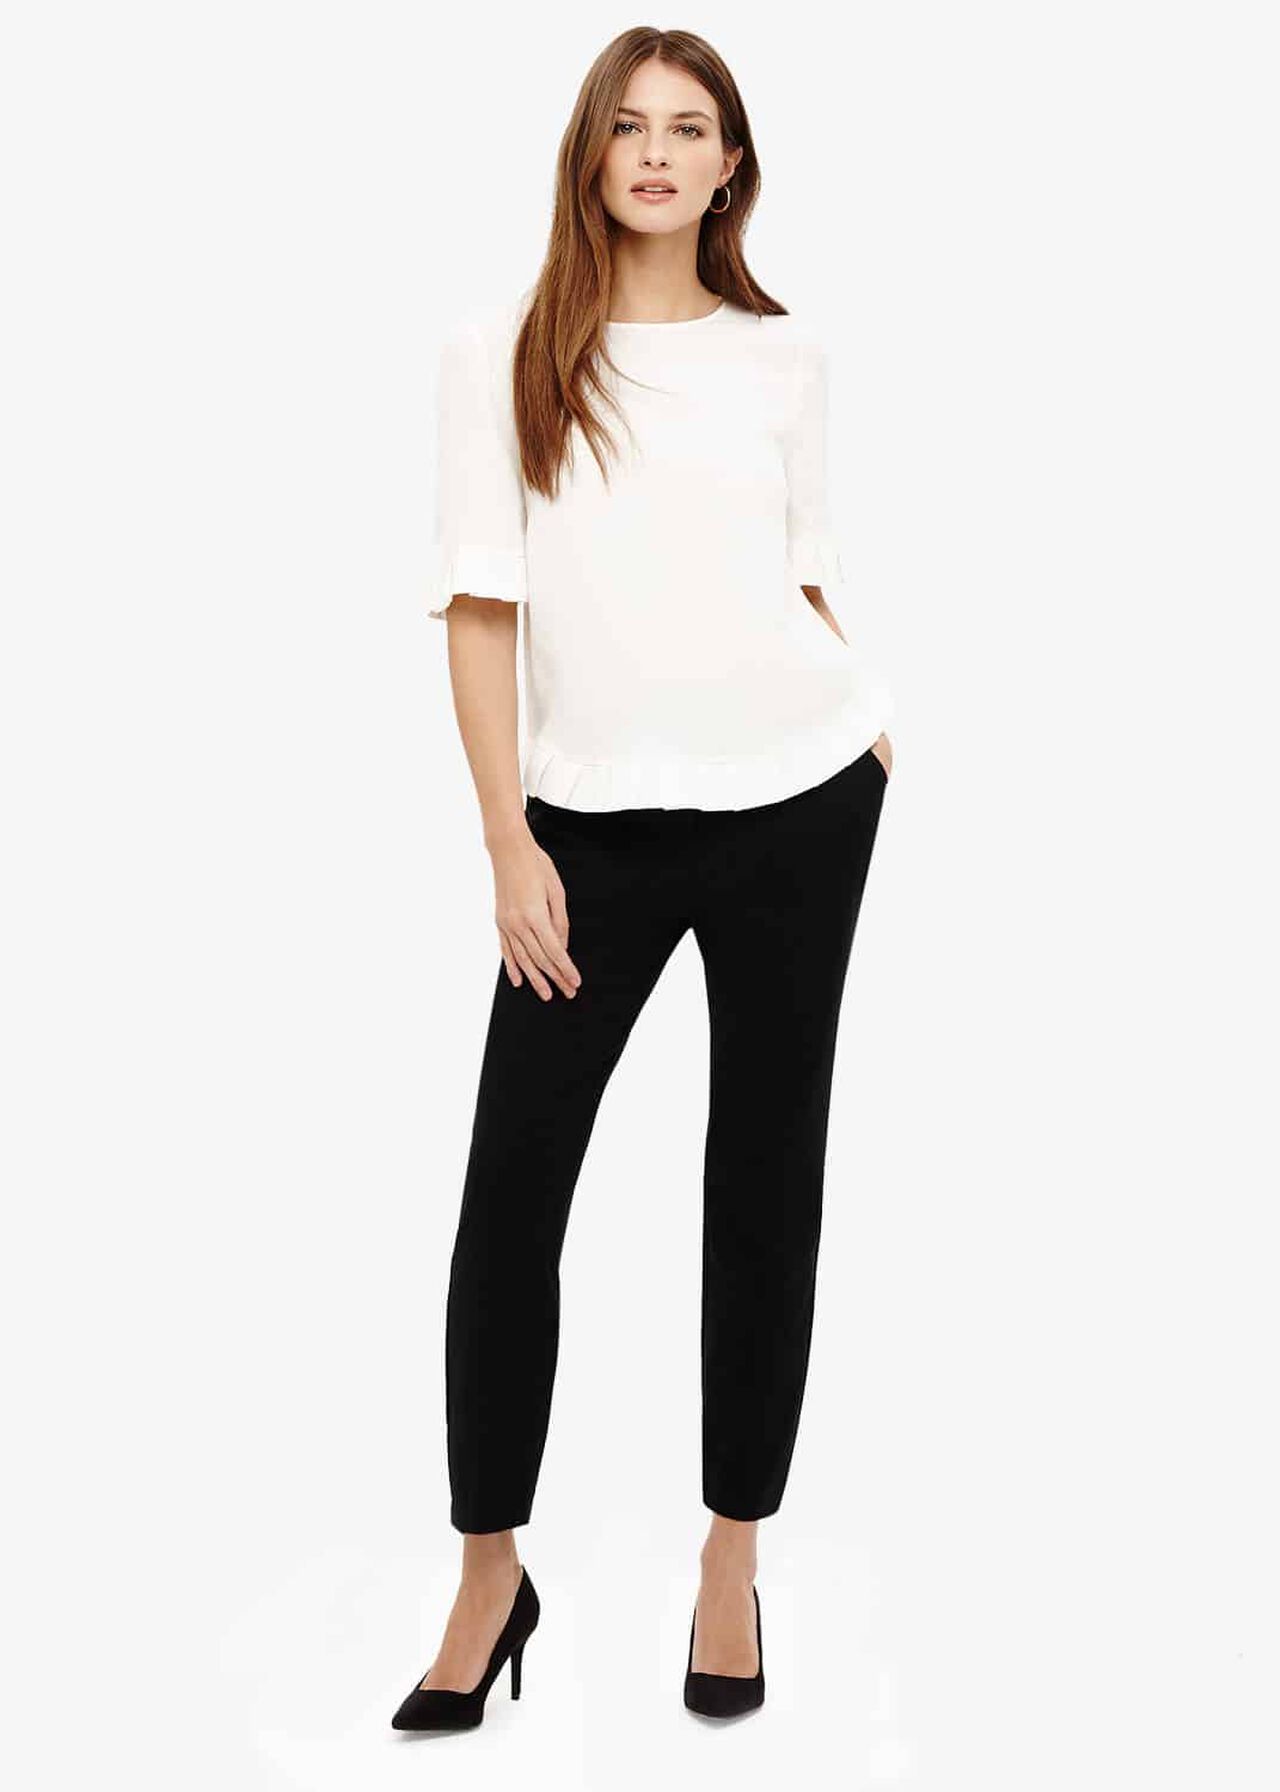 Lucy-Lou Buckle Trousers